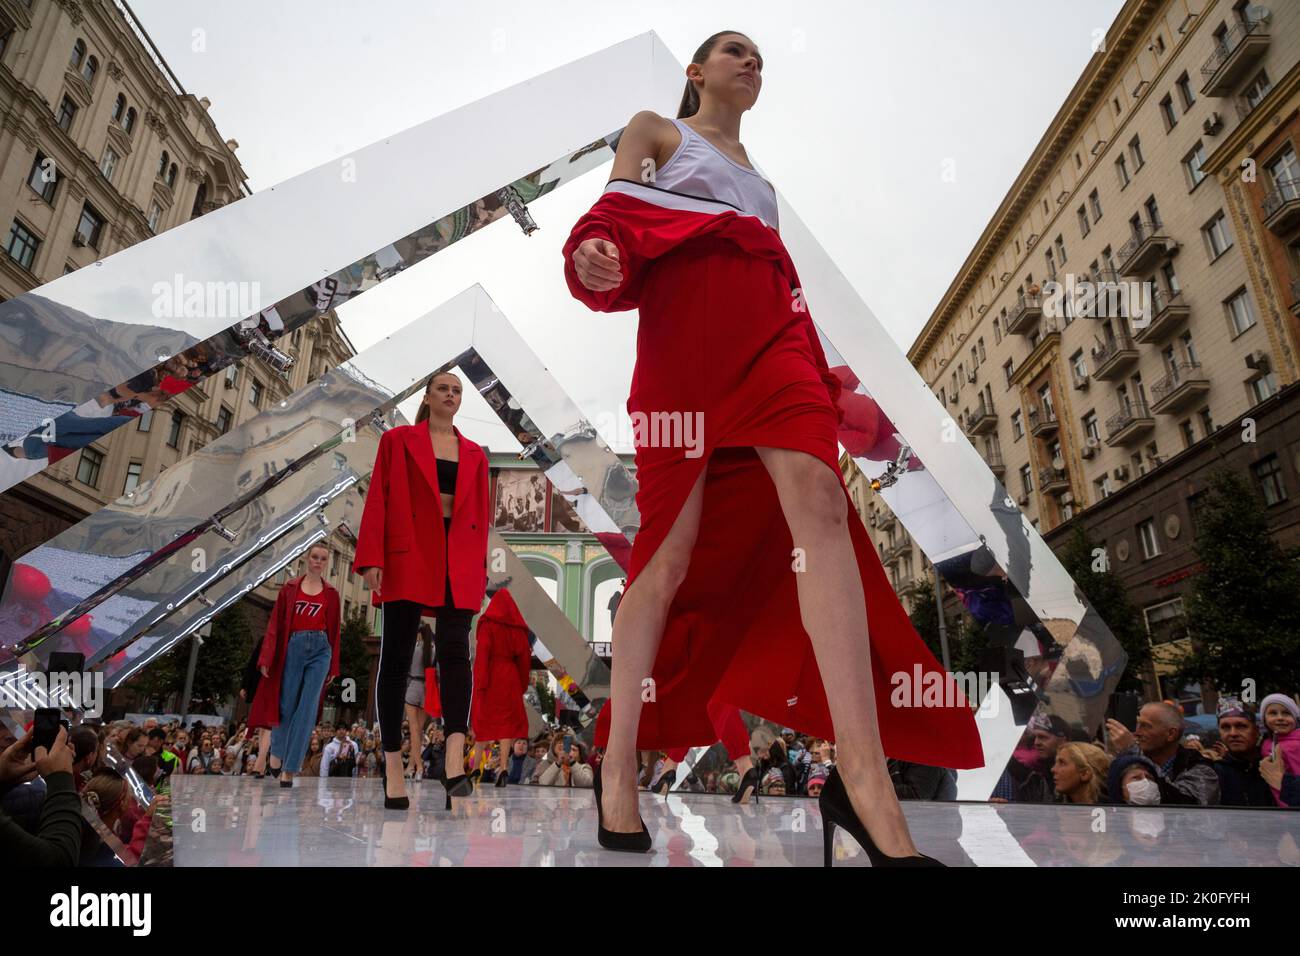 Moscow, Russia. 11th of September, 2022. Models are showing the collection 'Moscow 777' of the DNK Russia designer brand by Olga Kovalenko at a podium during celebrations marking the 875th birthday of Moscow in Tverskaya Street, Russia. Nikolay Vinokurov/Alamy Live News Stock Photo